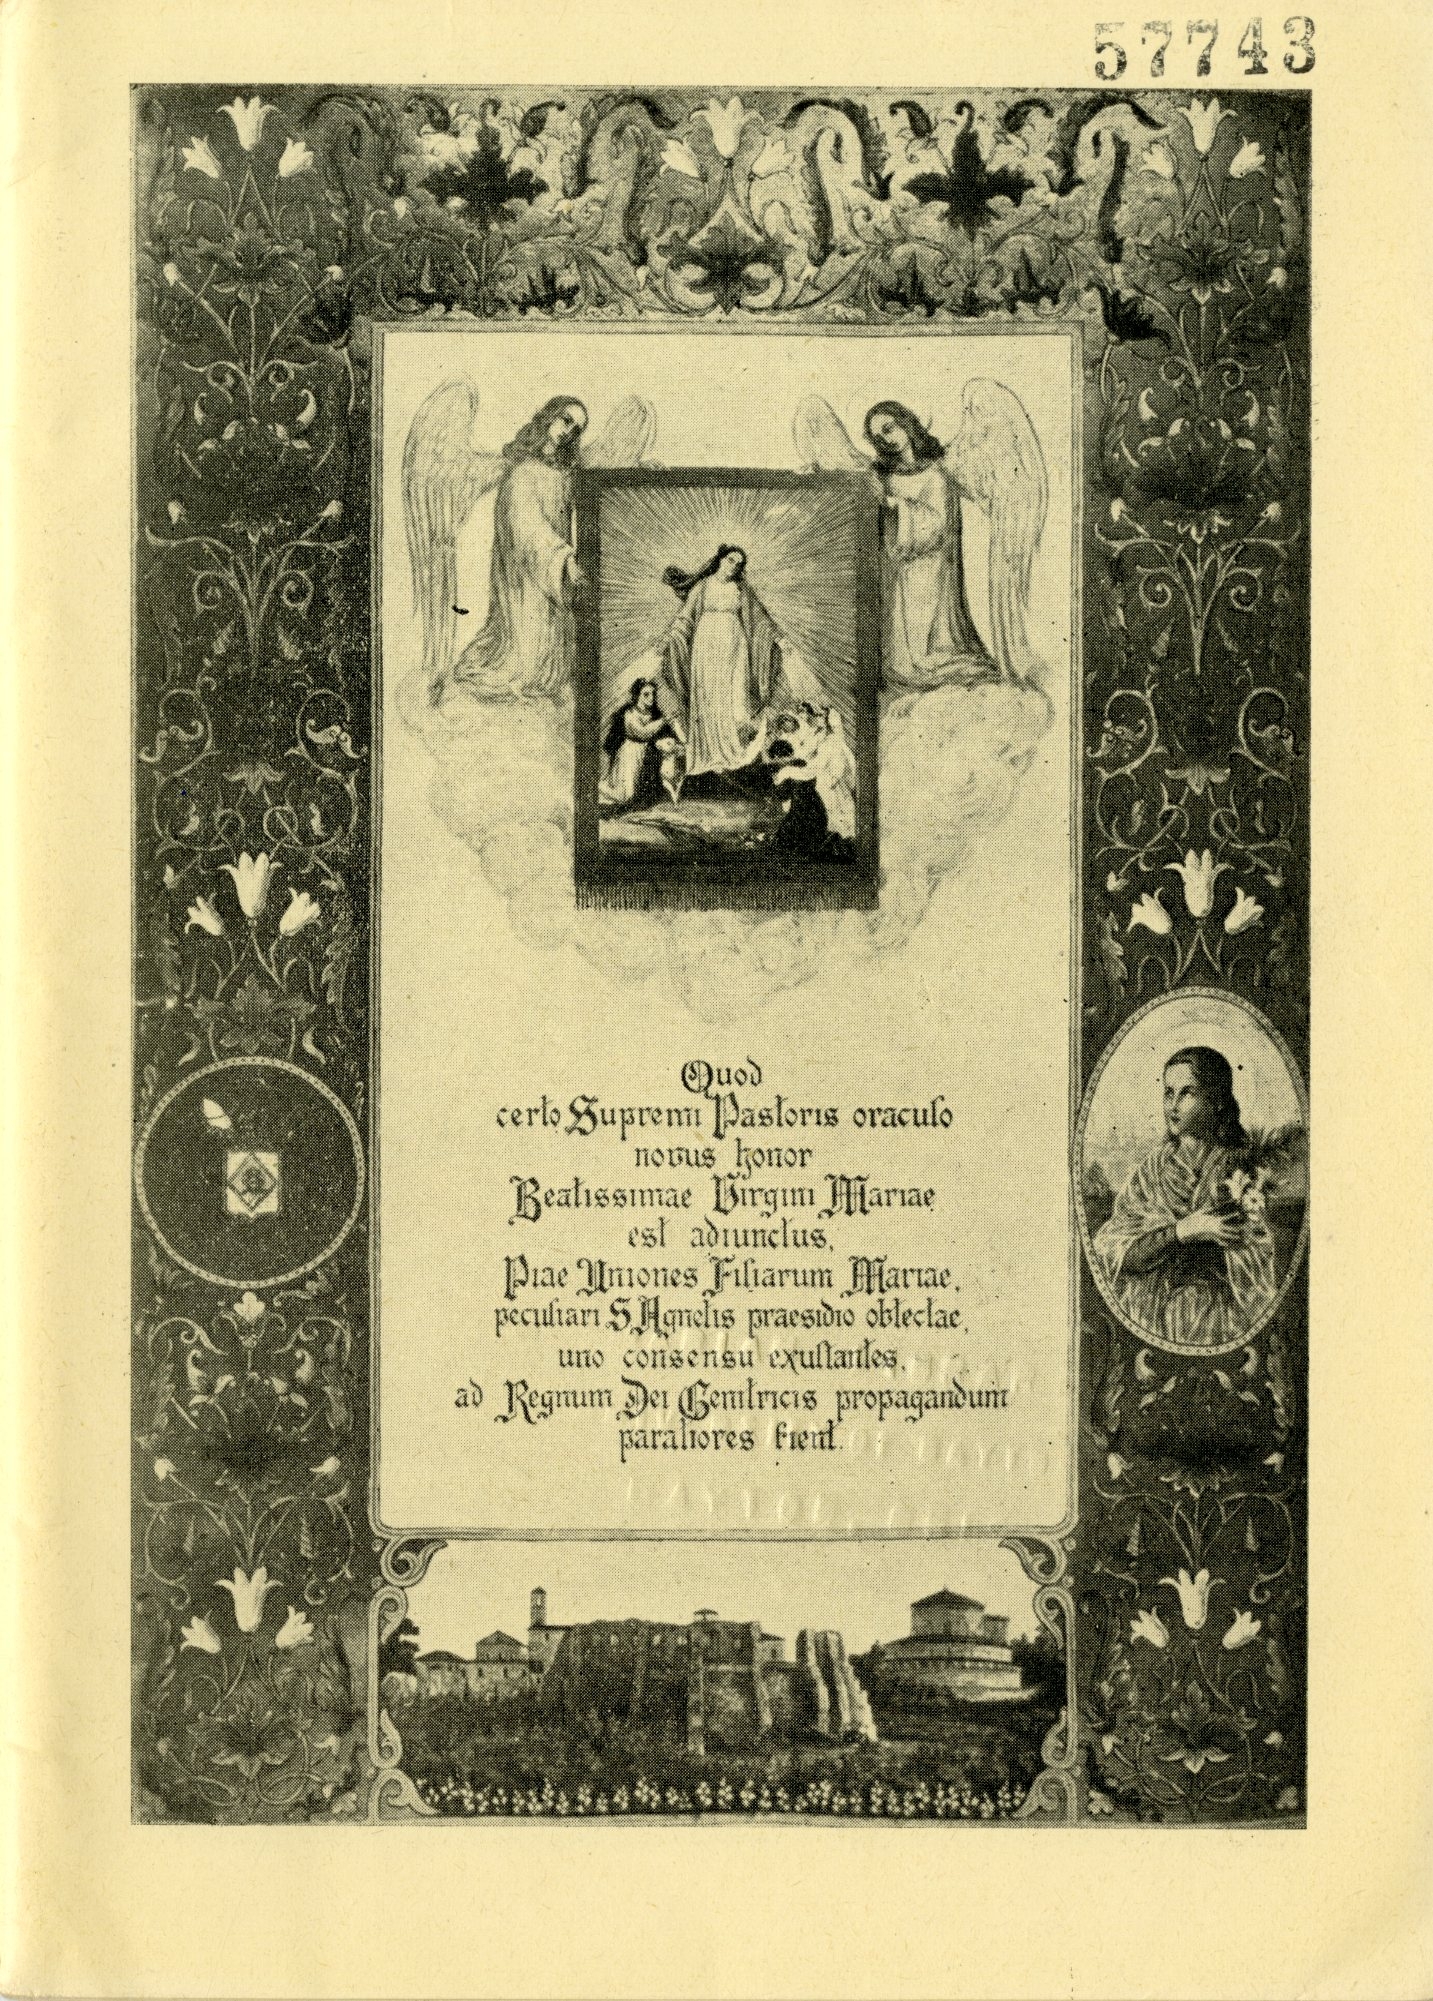 Front piece of a miniature facsimile of Munificentissimus Deus, the Apostolic constitution written by Pope Pius XII declaring the Assumption of Mary as a dogma.